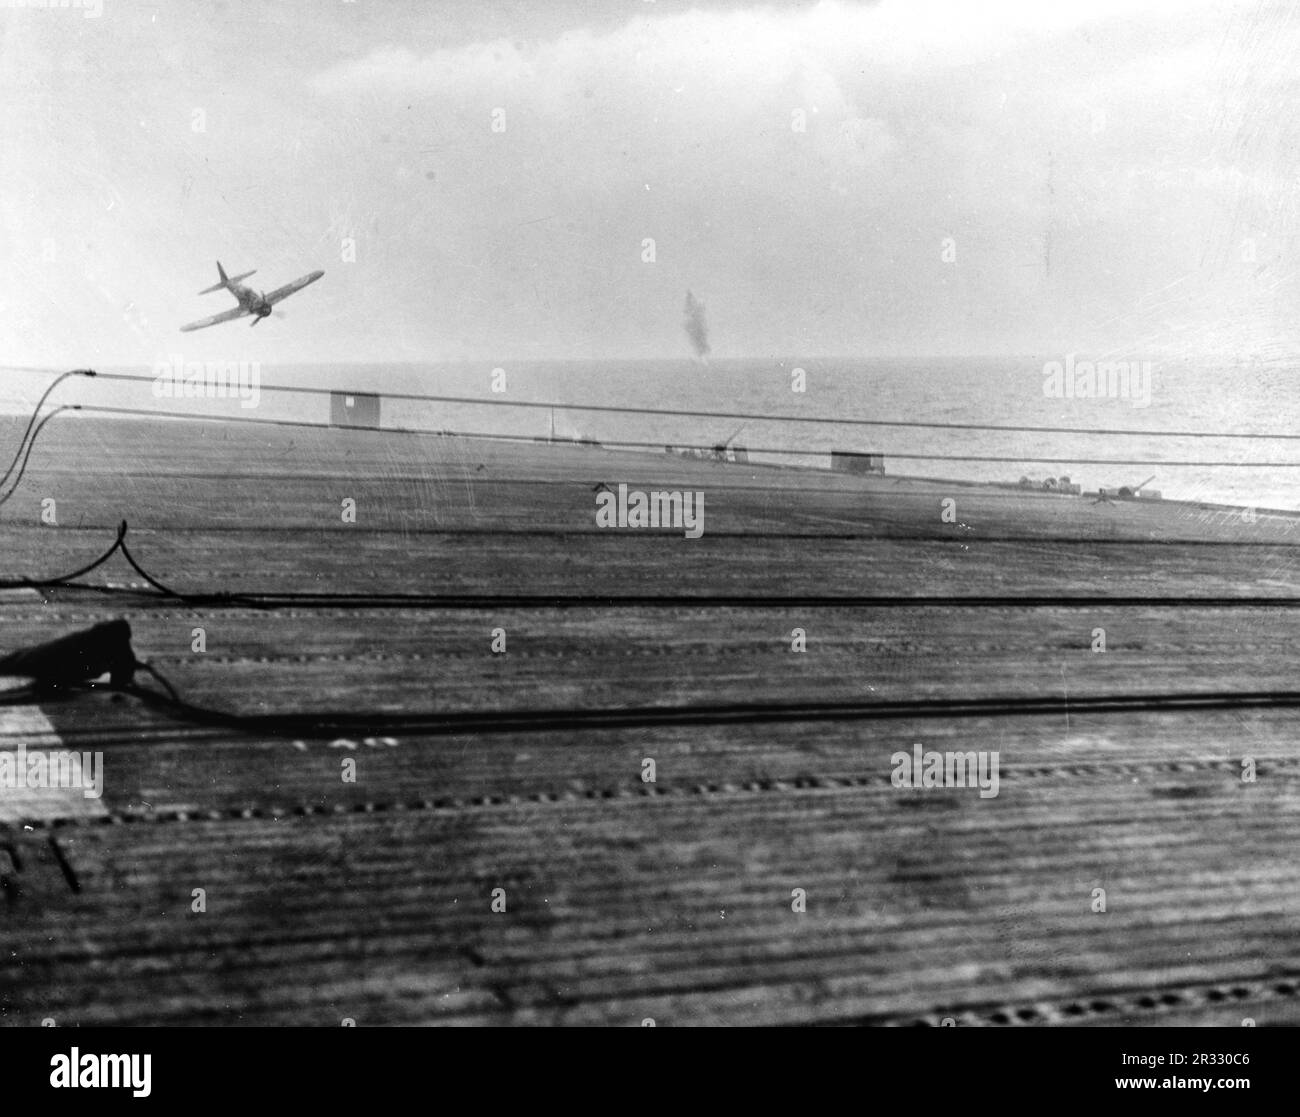 A Japanese kamikaze pilot in a Mitsubishi A6M5 Model 52 ('Zero') crash dives on the U.S. Navy escort carrier USS White Plains (CVE-66) on 25 October 1944. The aircraft missed the flight deck and impacted the water just off the port quarter of the ship. When Japan was facing defeat in late 1944 it chose to destroy US ships with suicide bombings, known as Kamikaze.These attacks were a potent physical and psychological weapon and sunk a total of 47 ships at a cost of more than 3000 pilots and planes. By late 1944 the US Navy was large enough that the losses were insignificant and they did not alt Stock Photo